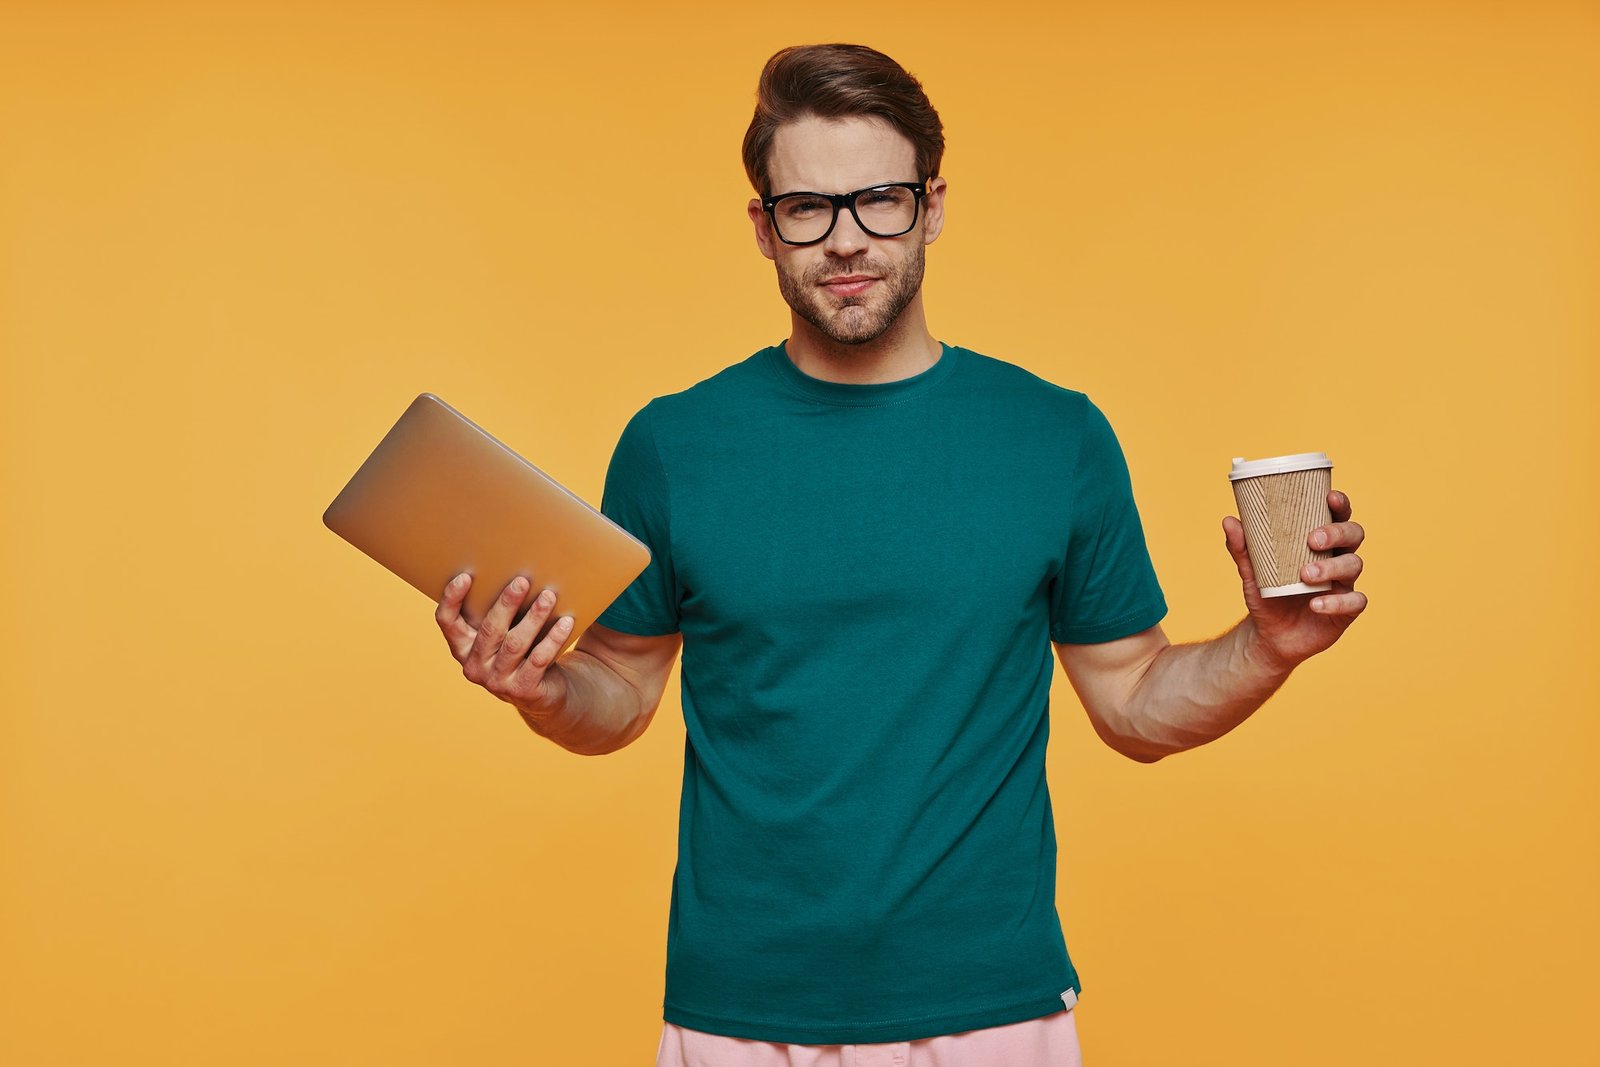 Handsome young man in casual clothing carrying digital tablet and cup